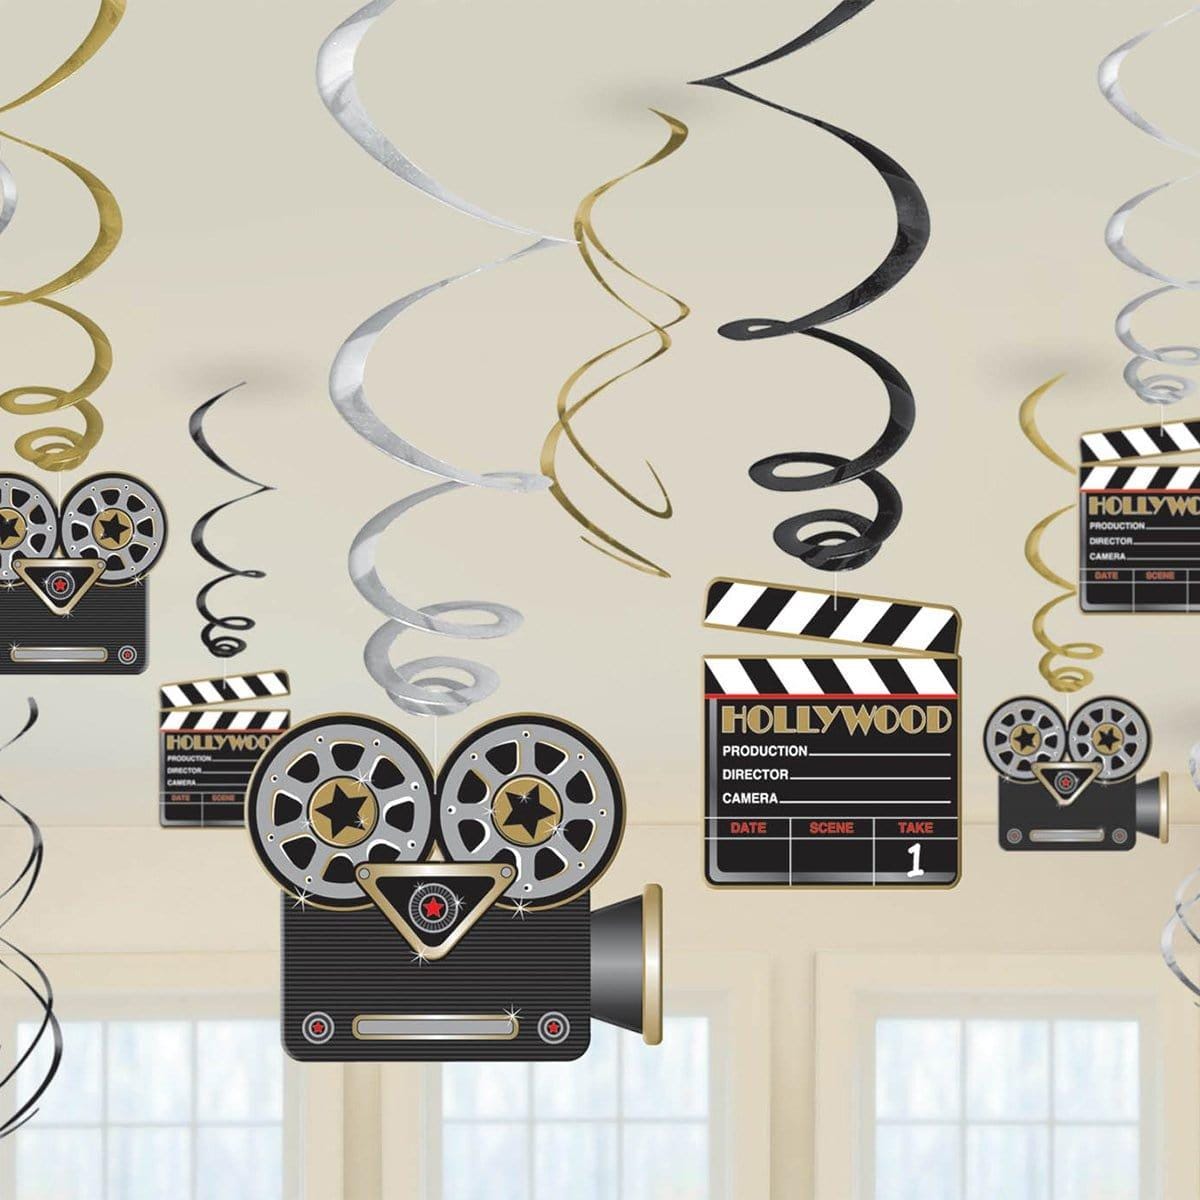 Buy Theme Party Camera Swirl Decorations, 12 per Package sold at Party Expert